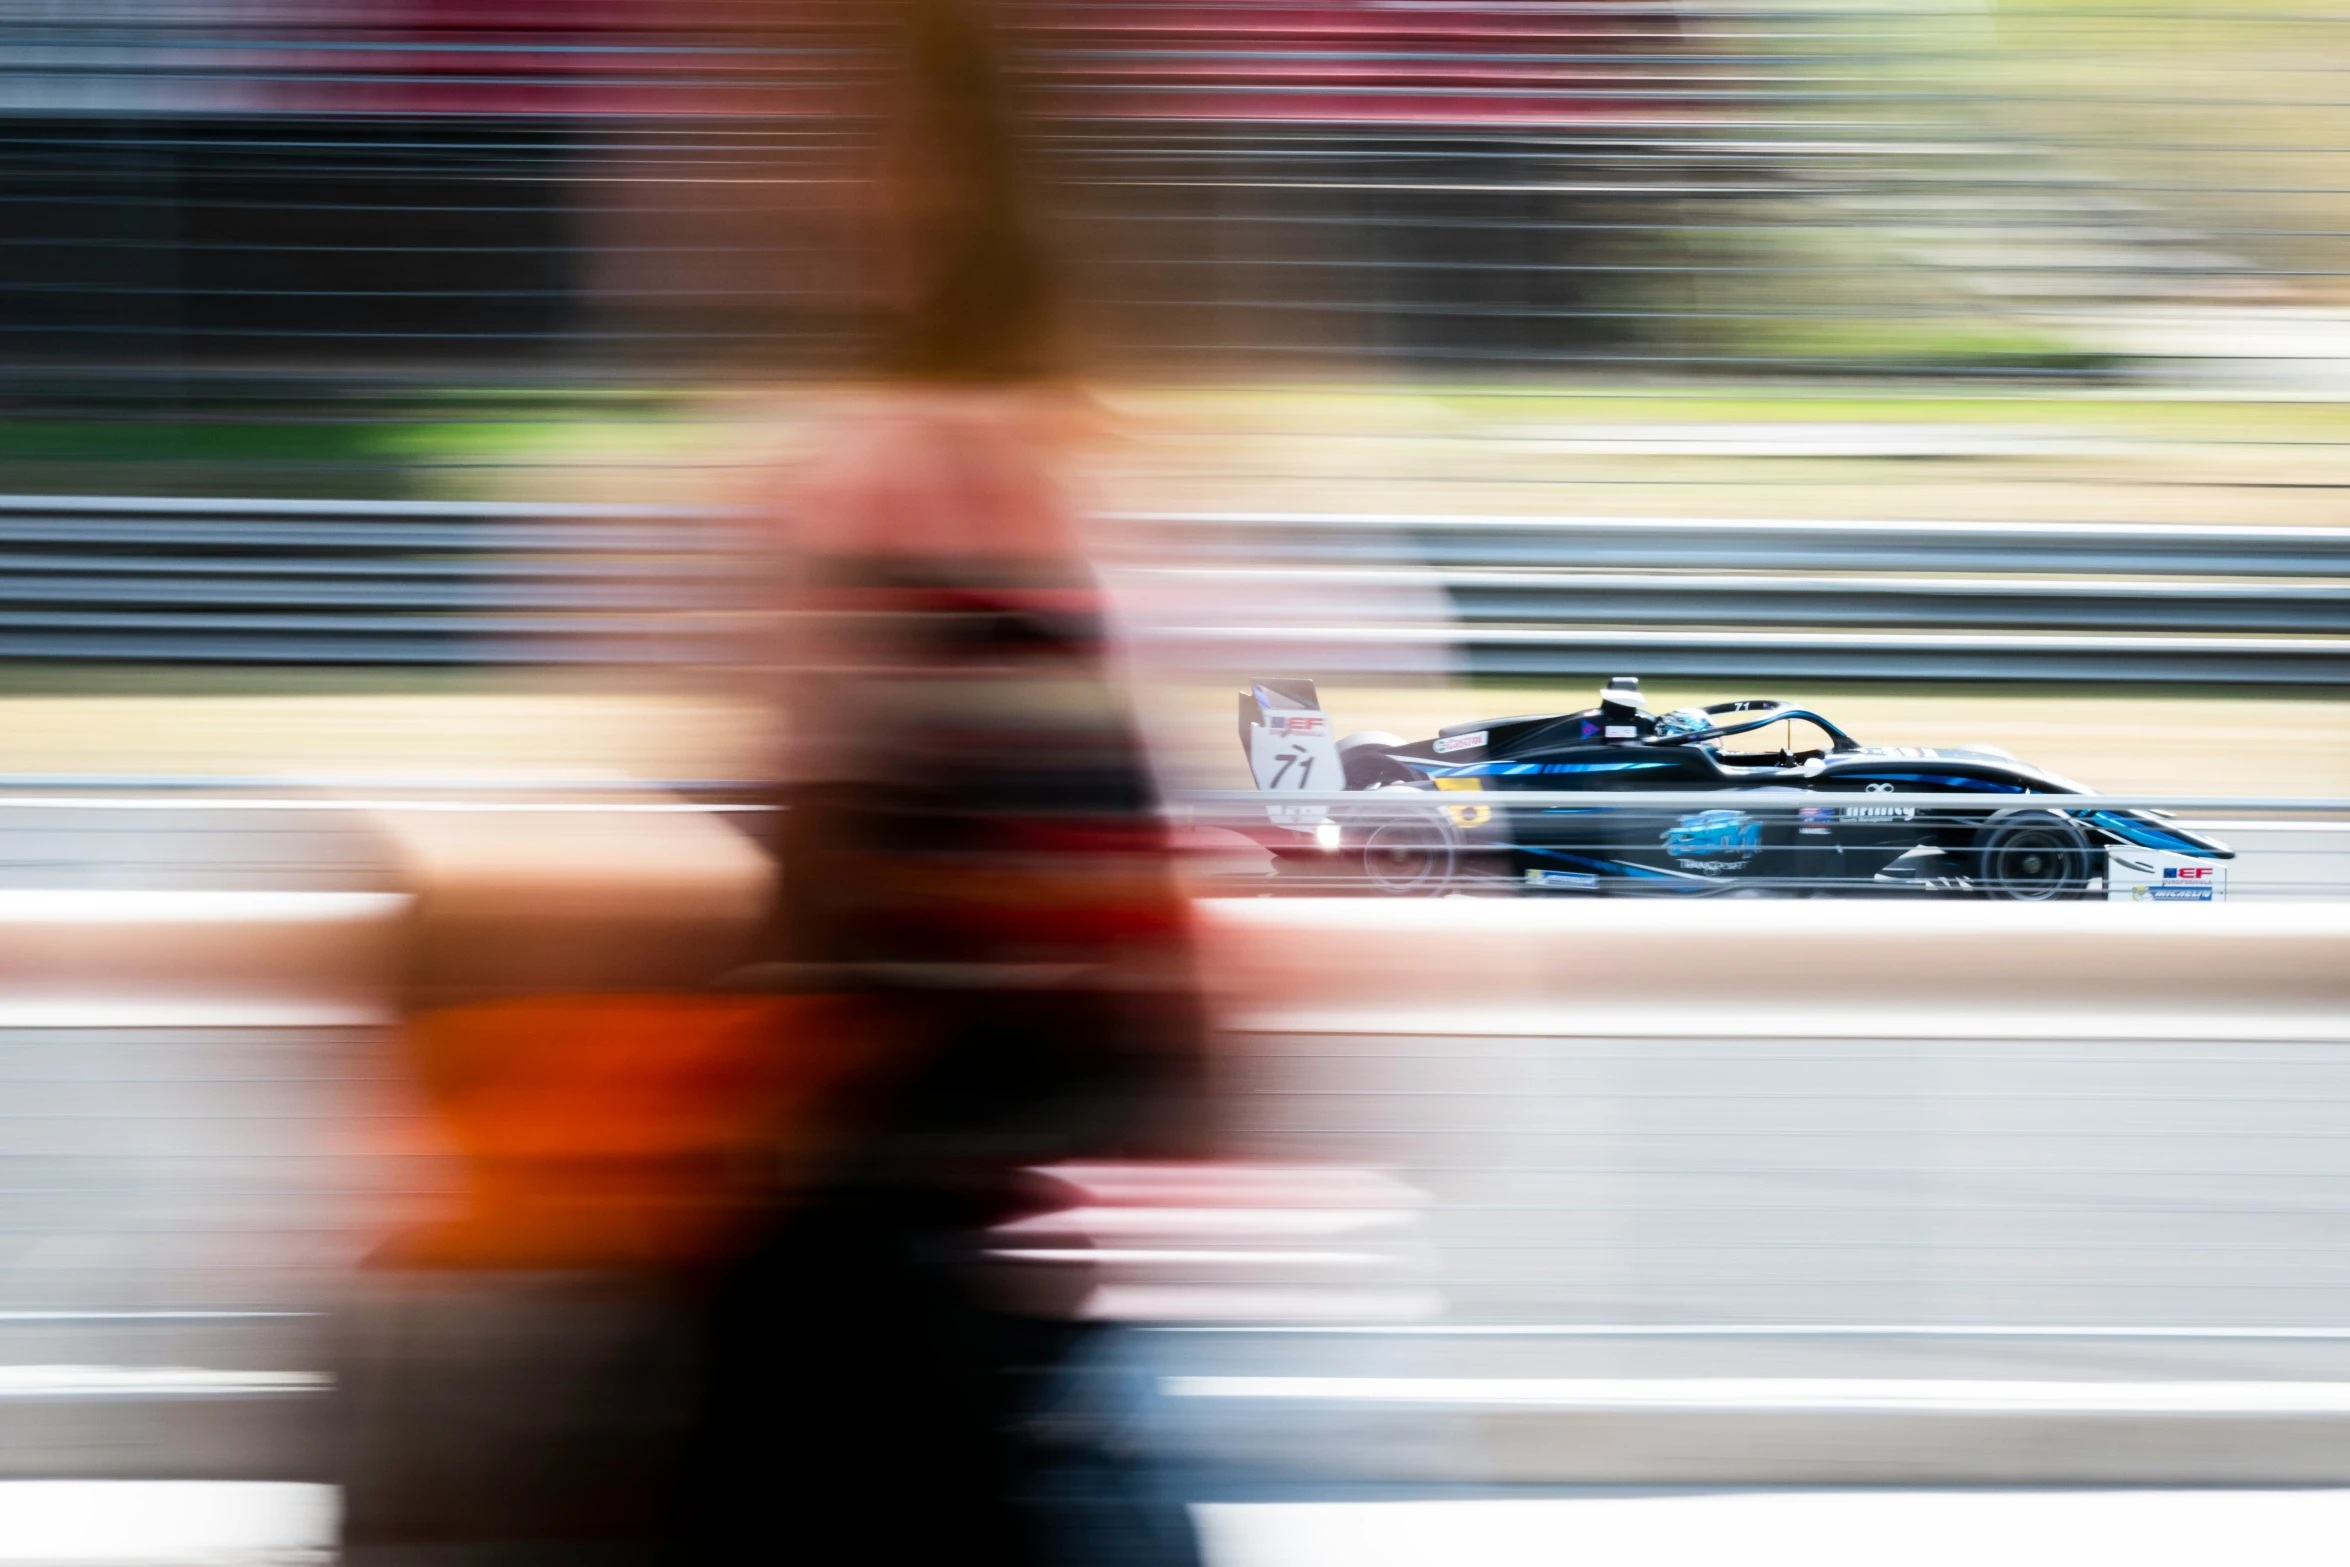 the blurry image shows a person holding up a remote control while standing near a race car